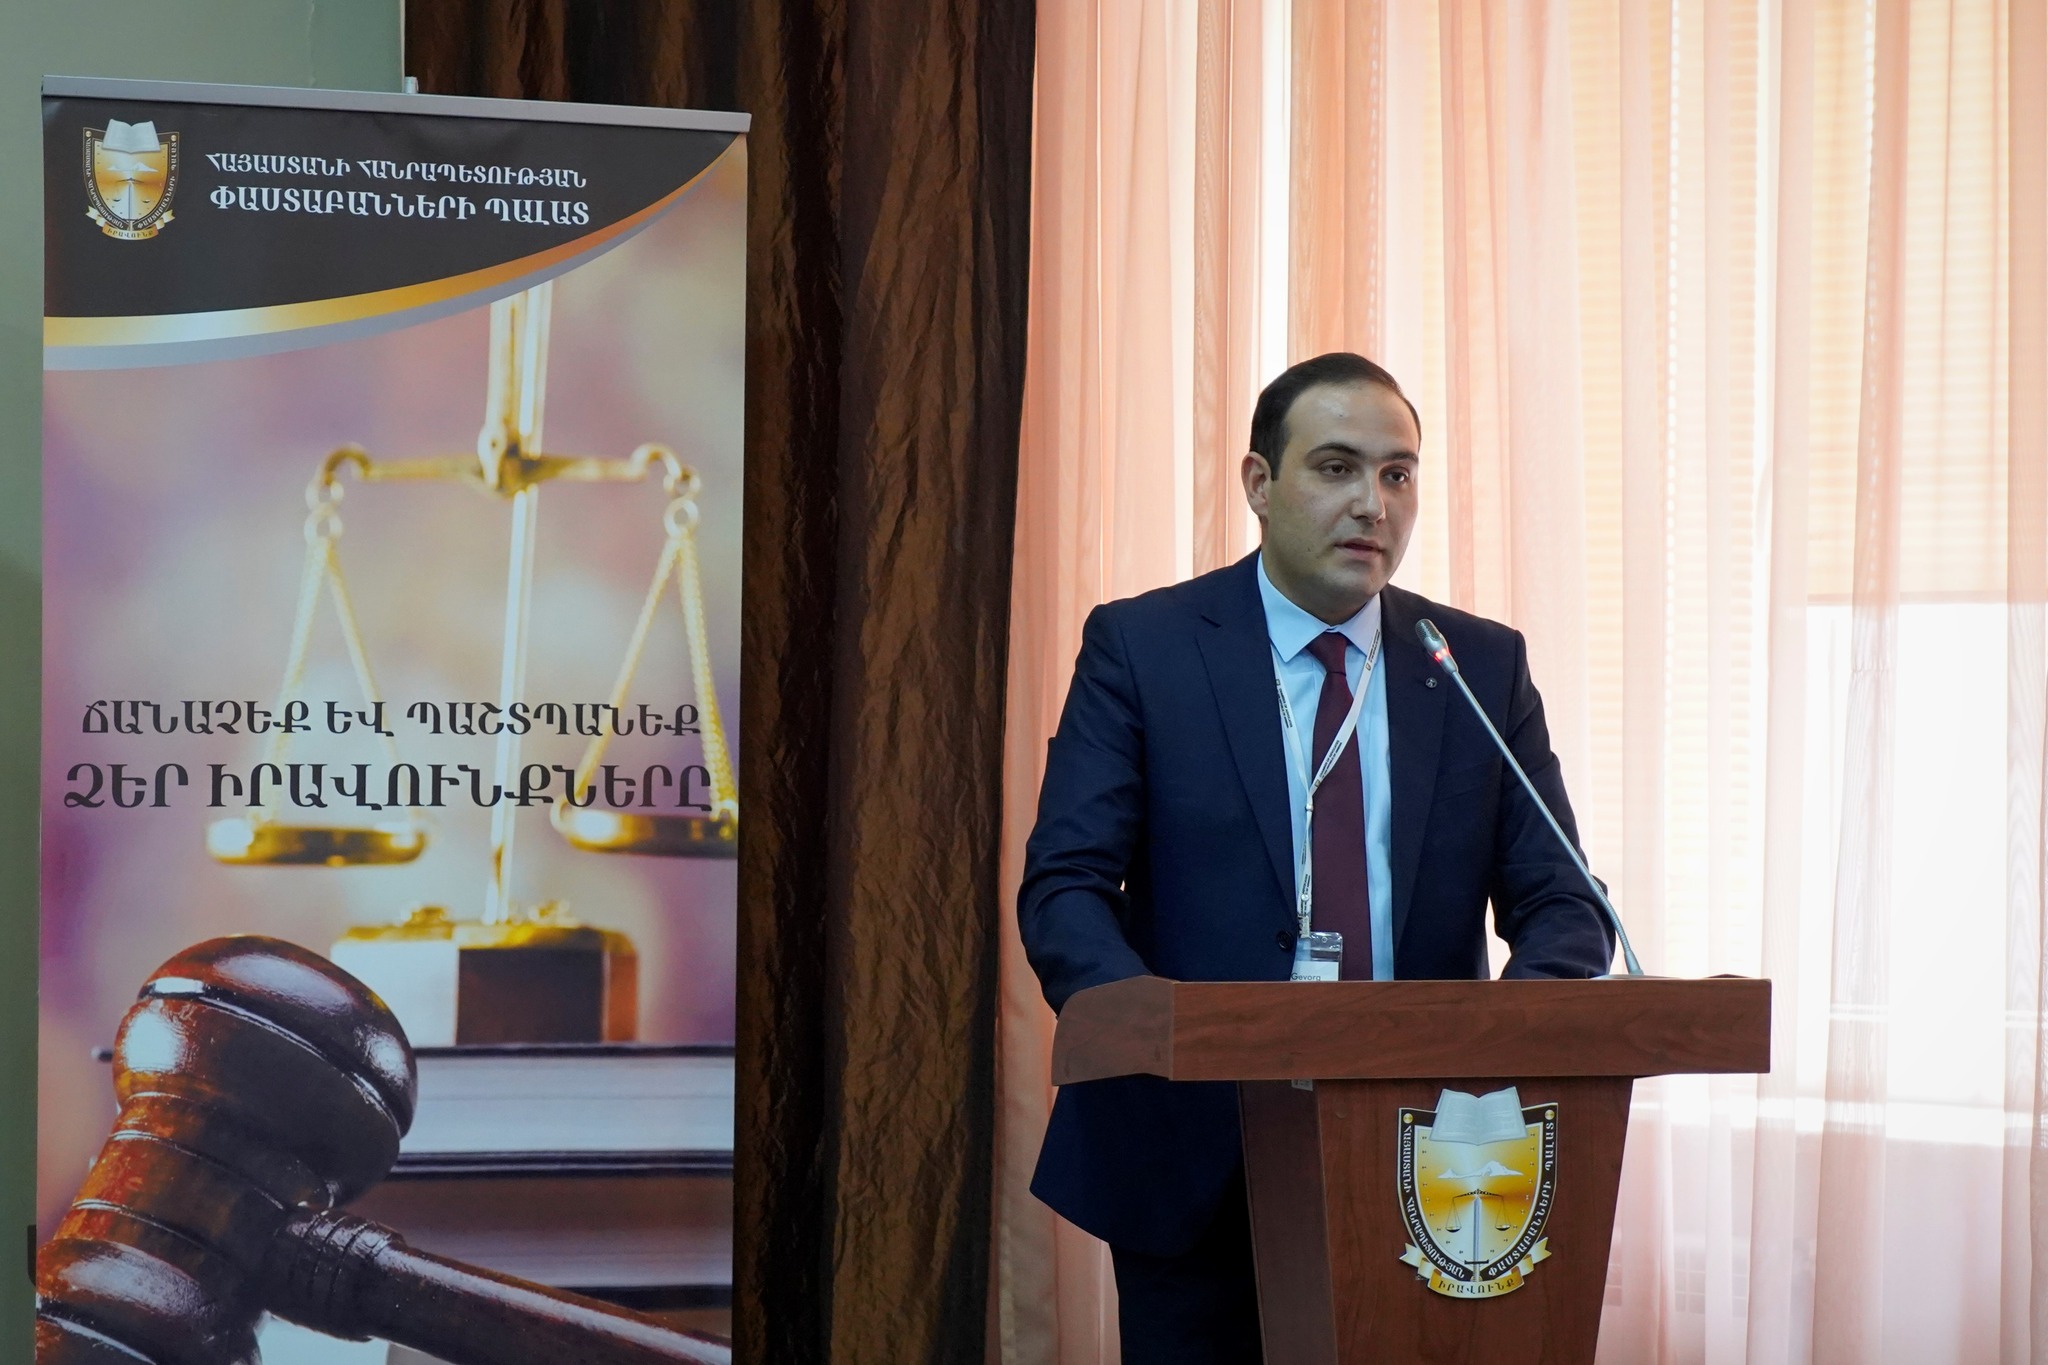 A discussion was held on the topic "Challenges in Protecting Lawyers' Rights and Upholding the Rule of Law in Modern Times."